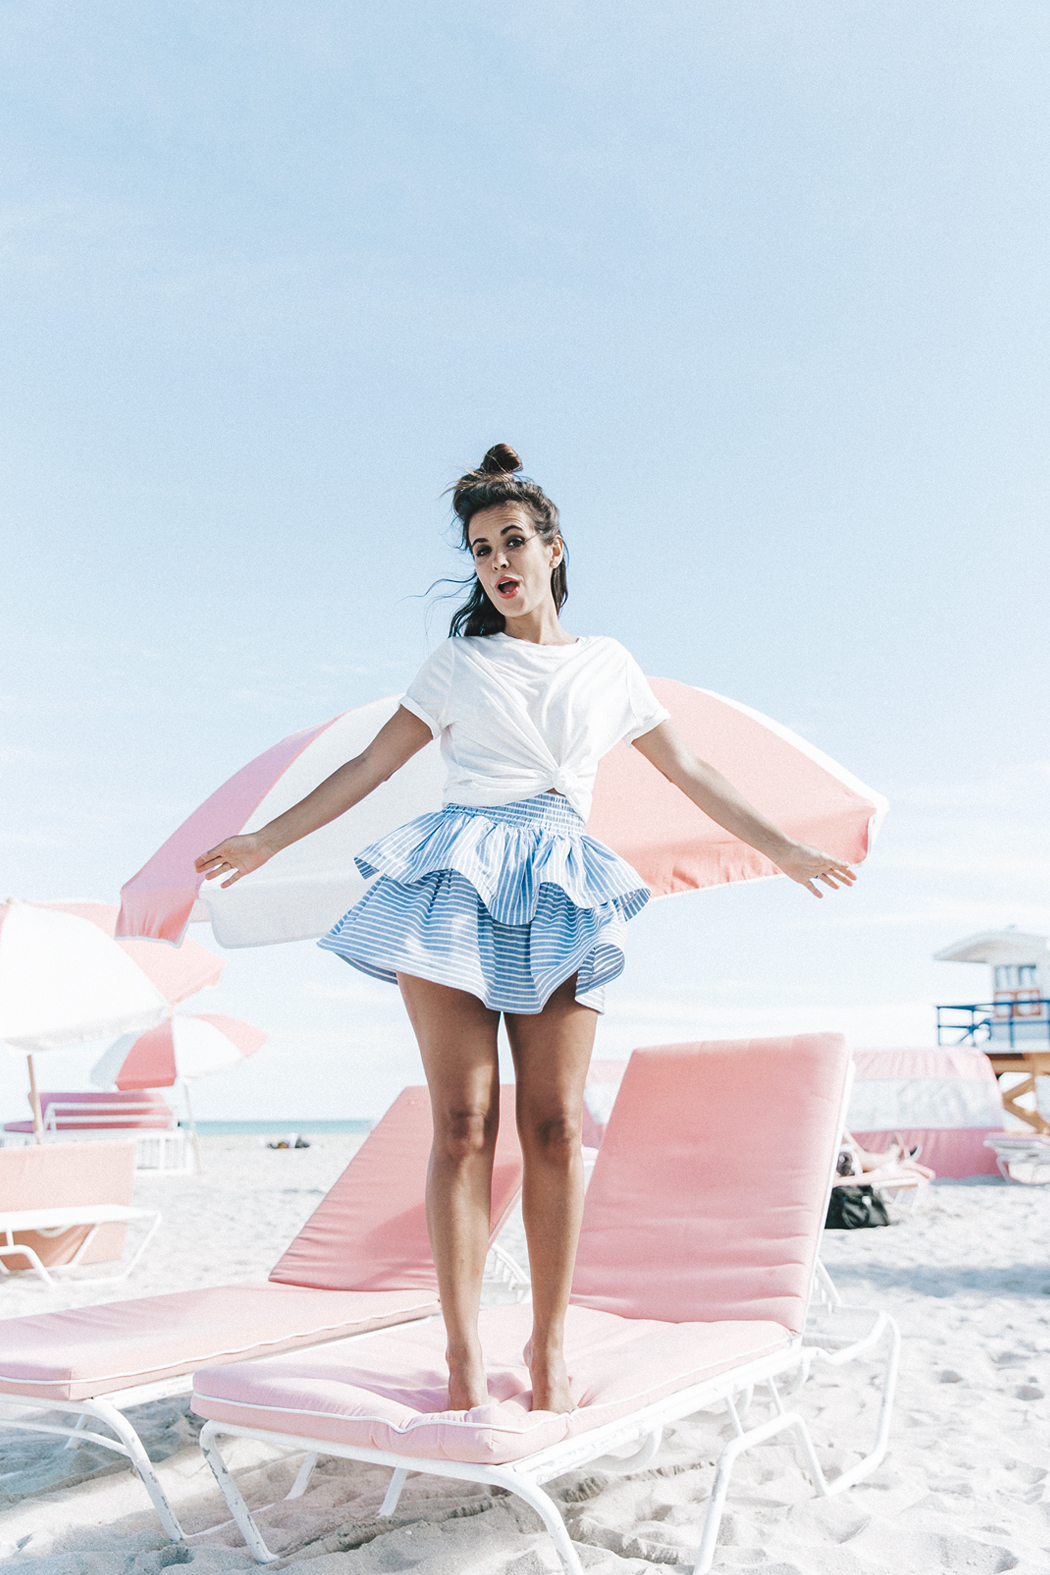 Miami-Striped_Skirt-Knotted_Top-Beach-South_Beach-Candy_Colors-Collage_On_The_Road-Street_Style-OUtfit-225